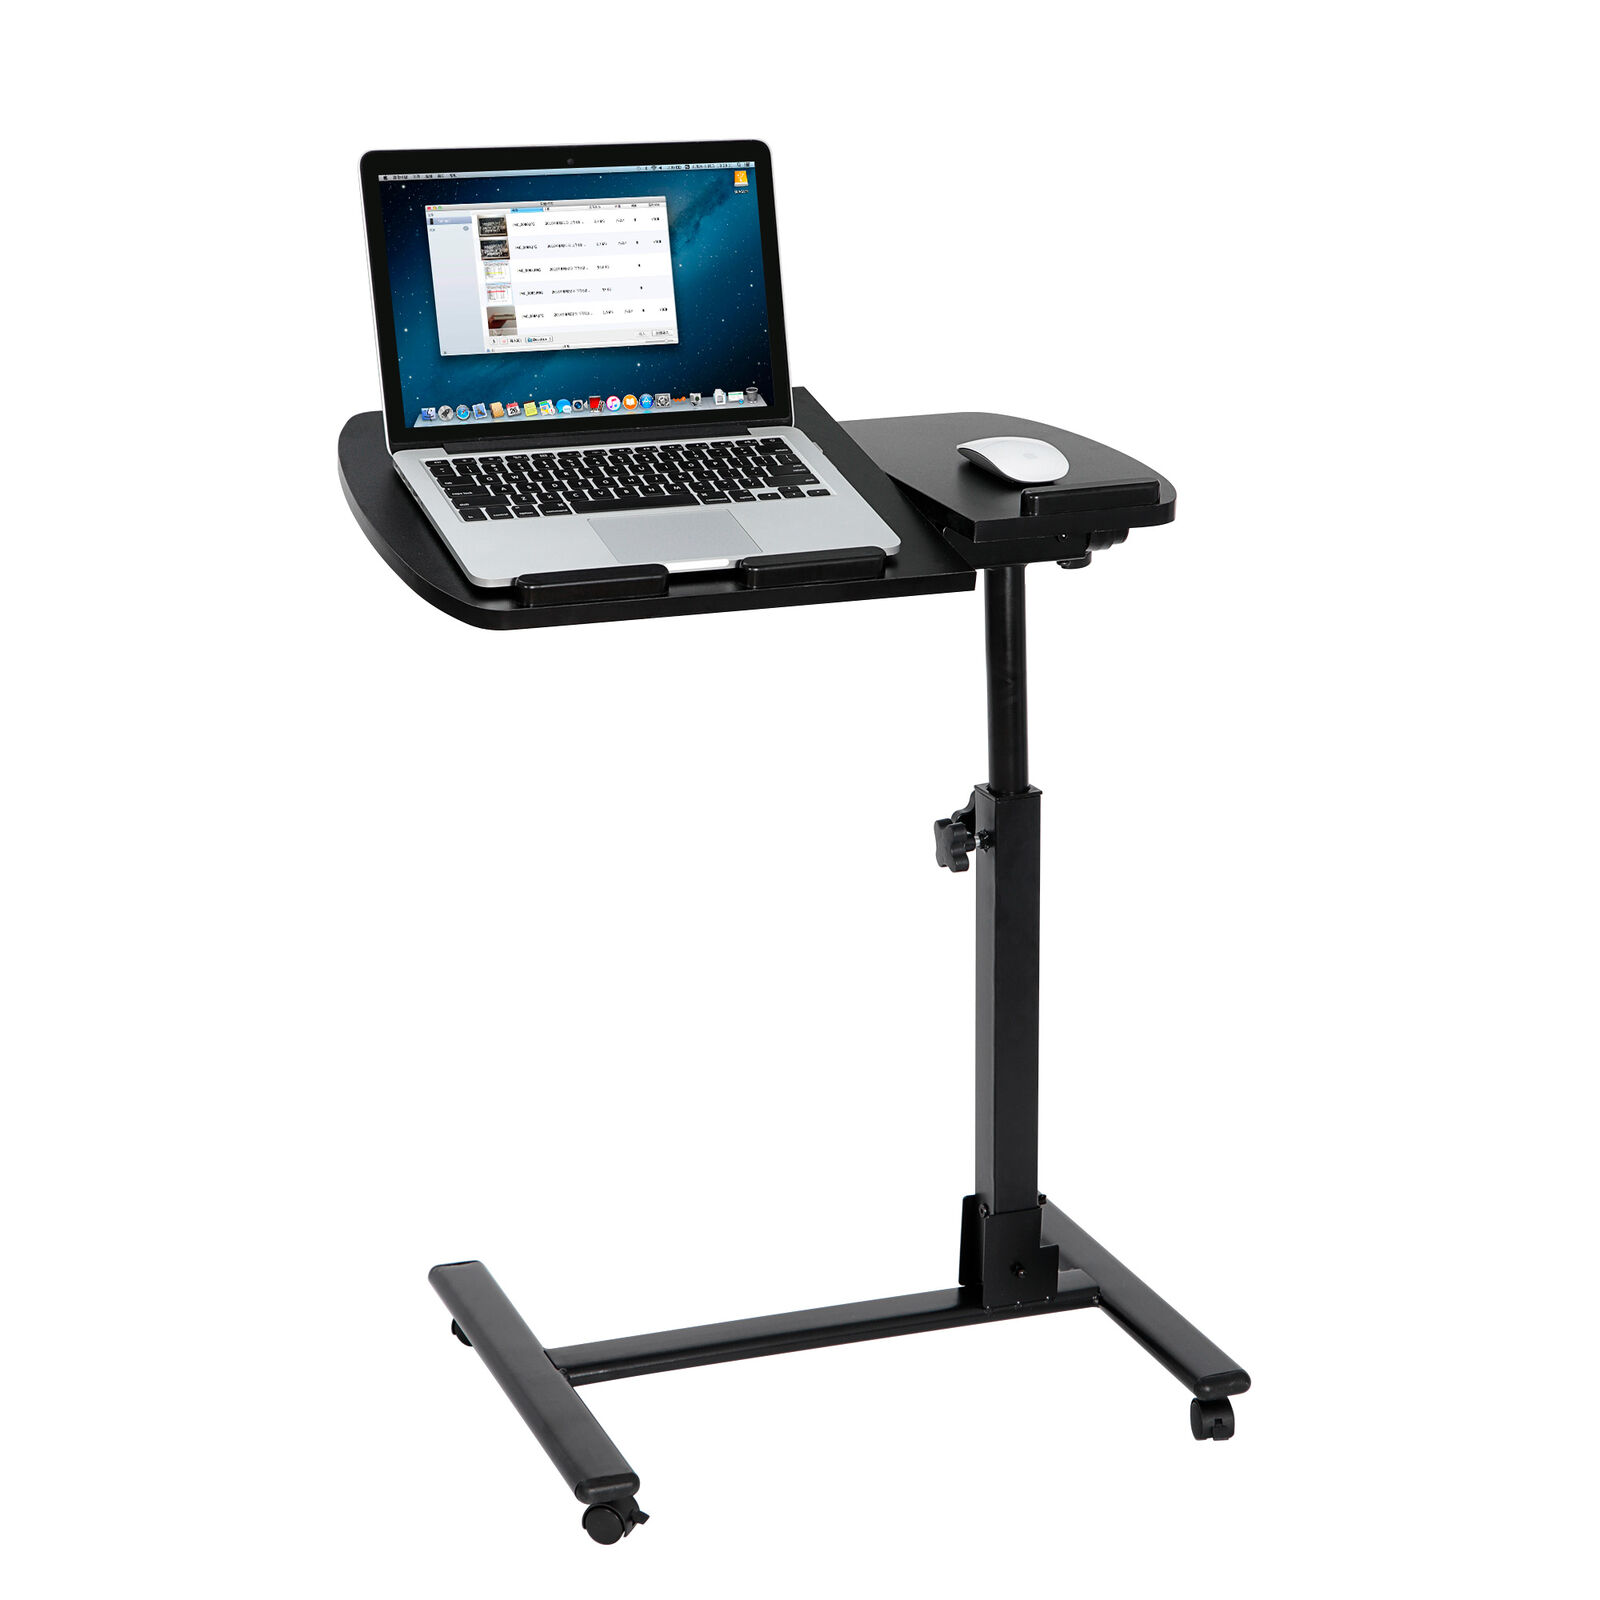 Adjustable Height 360° Swivel Laptop Desk PC Computer Notebook Stand with Wheels